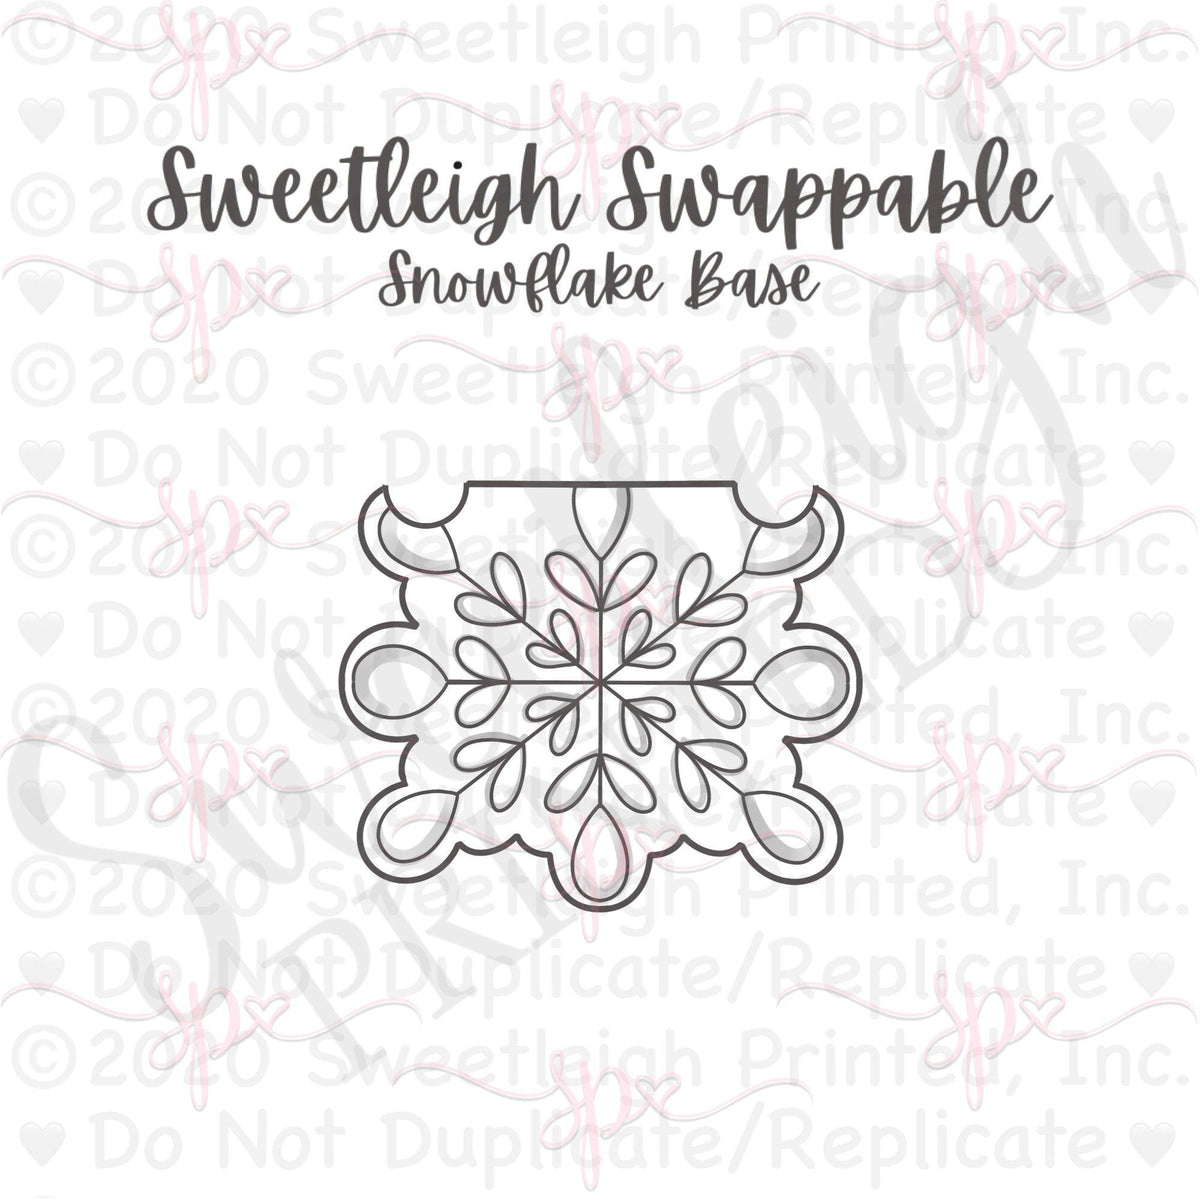 Sweetleigh Swappable Snowflake Base Cookie Cutter - Sweetleigh 